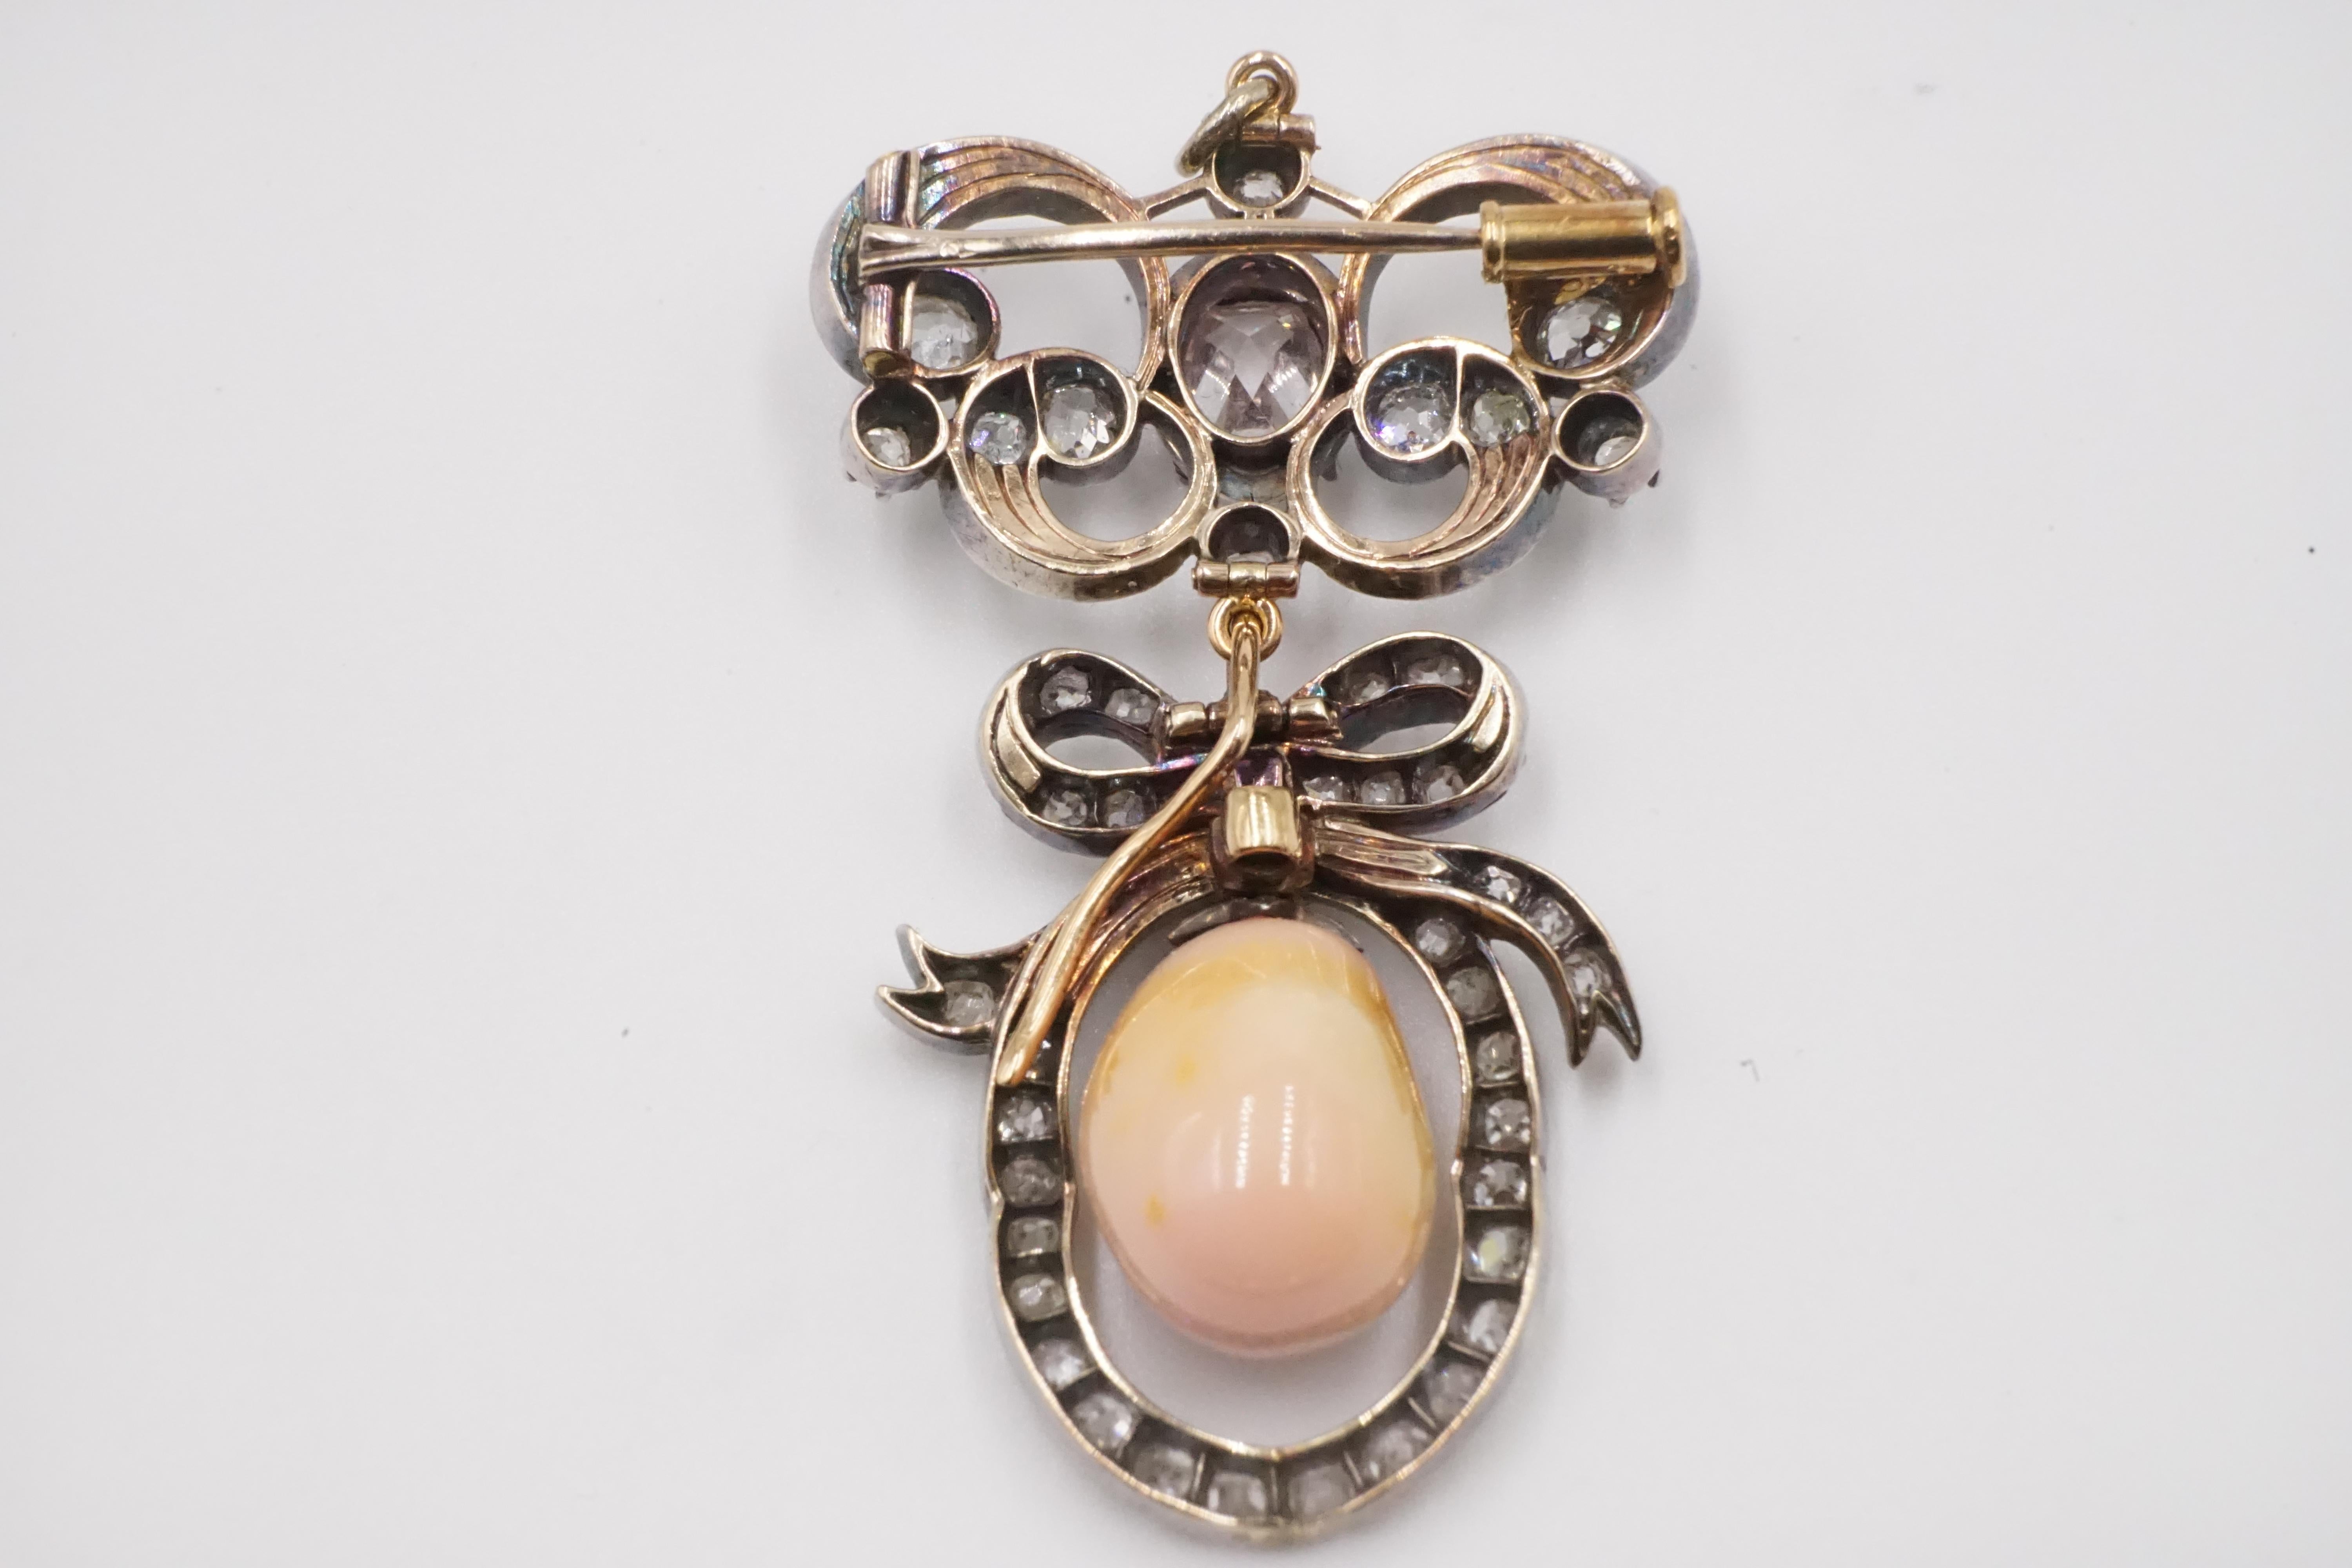 A Victorian Detachable Natural Queen Conch Pearl Gold Brooch with Cert. 

When detached the lower section with the pearl can be used as a pendant and the upper section can be wore as a stand alone brooch or attach to other brooch parts.

Silver on